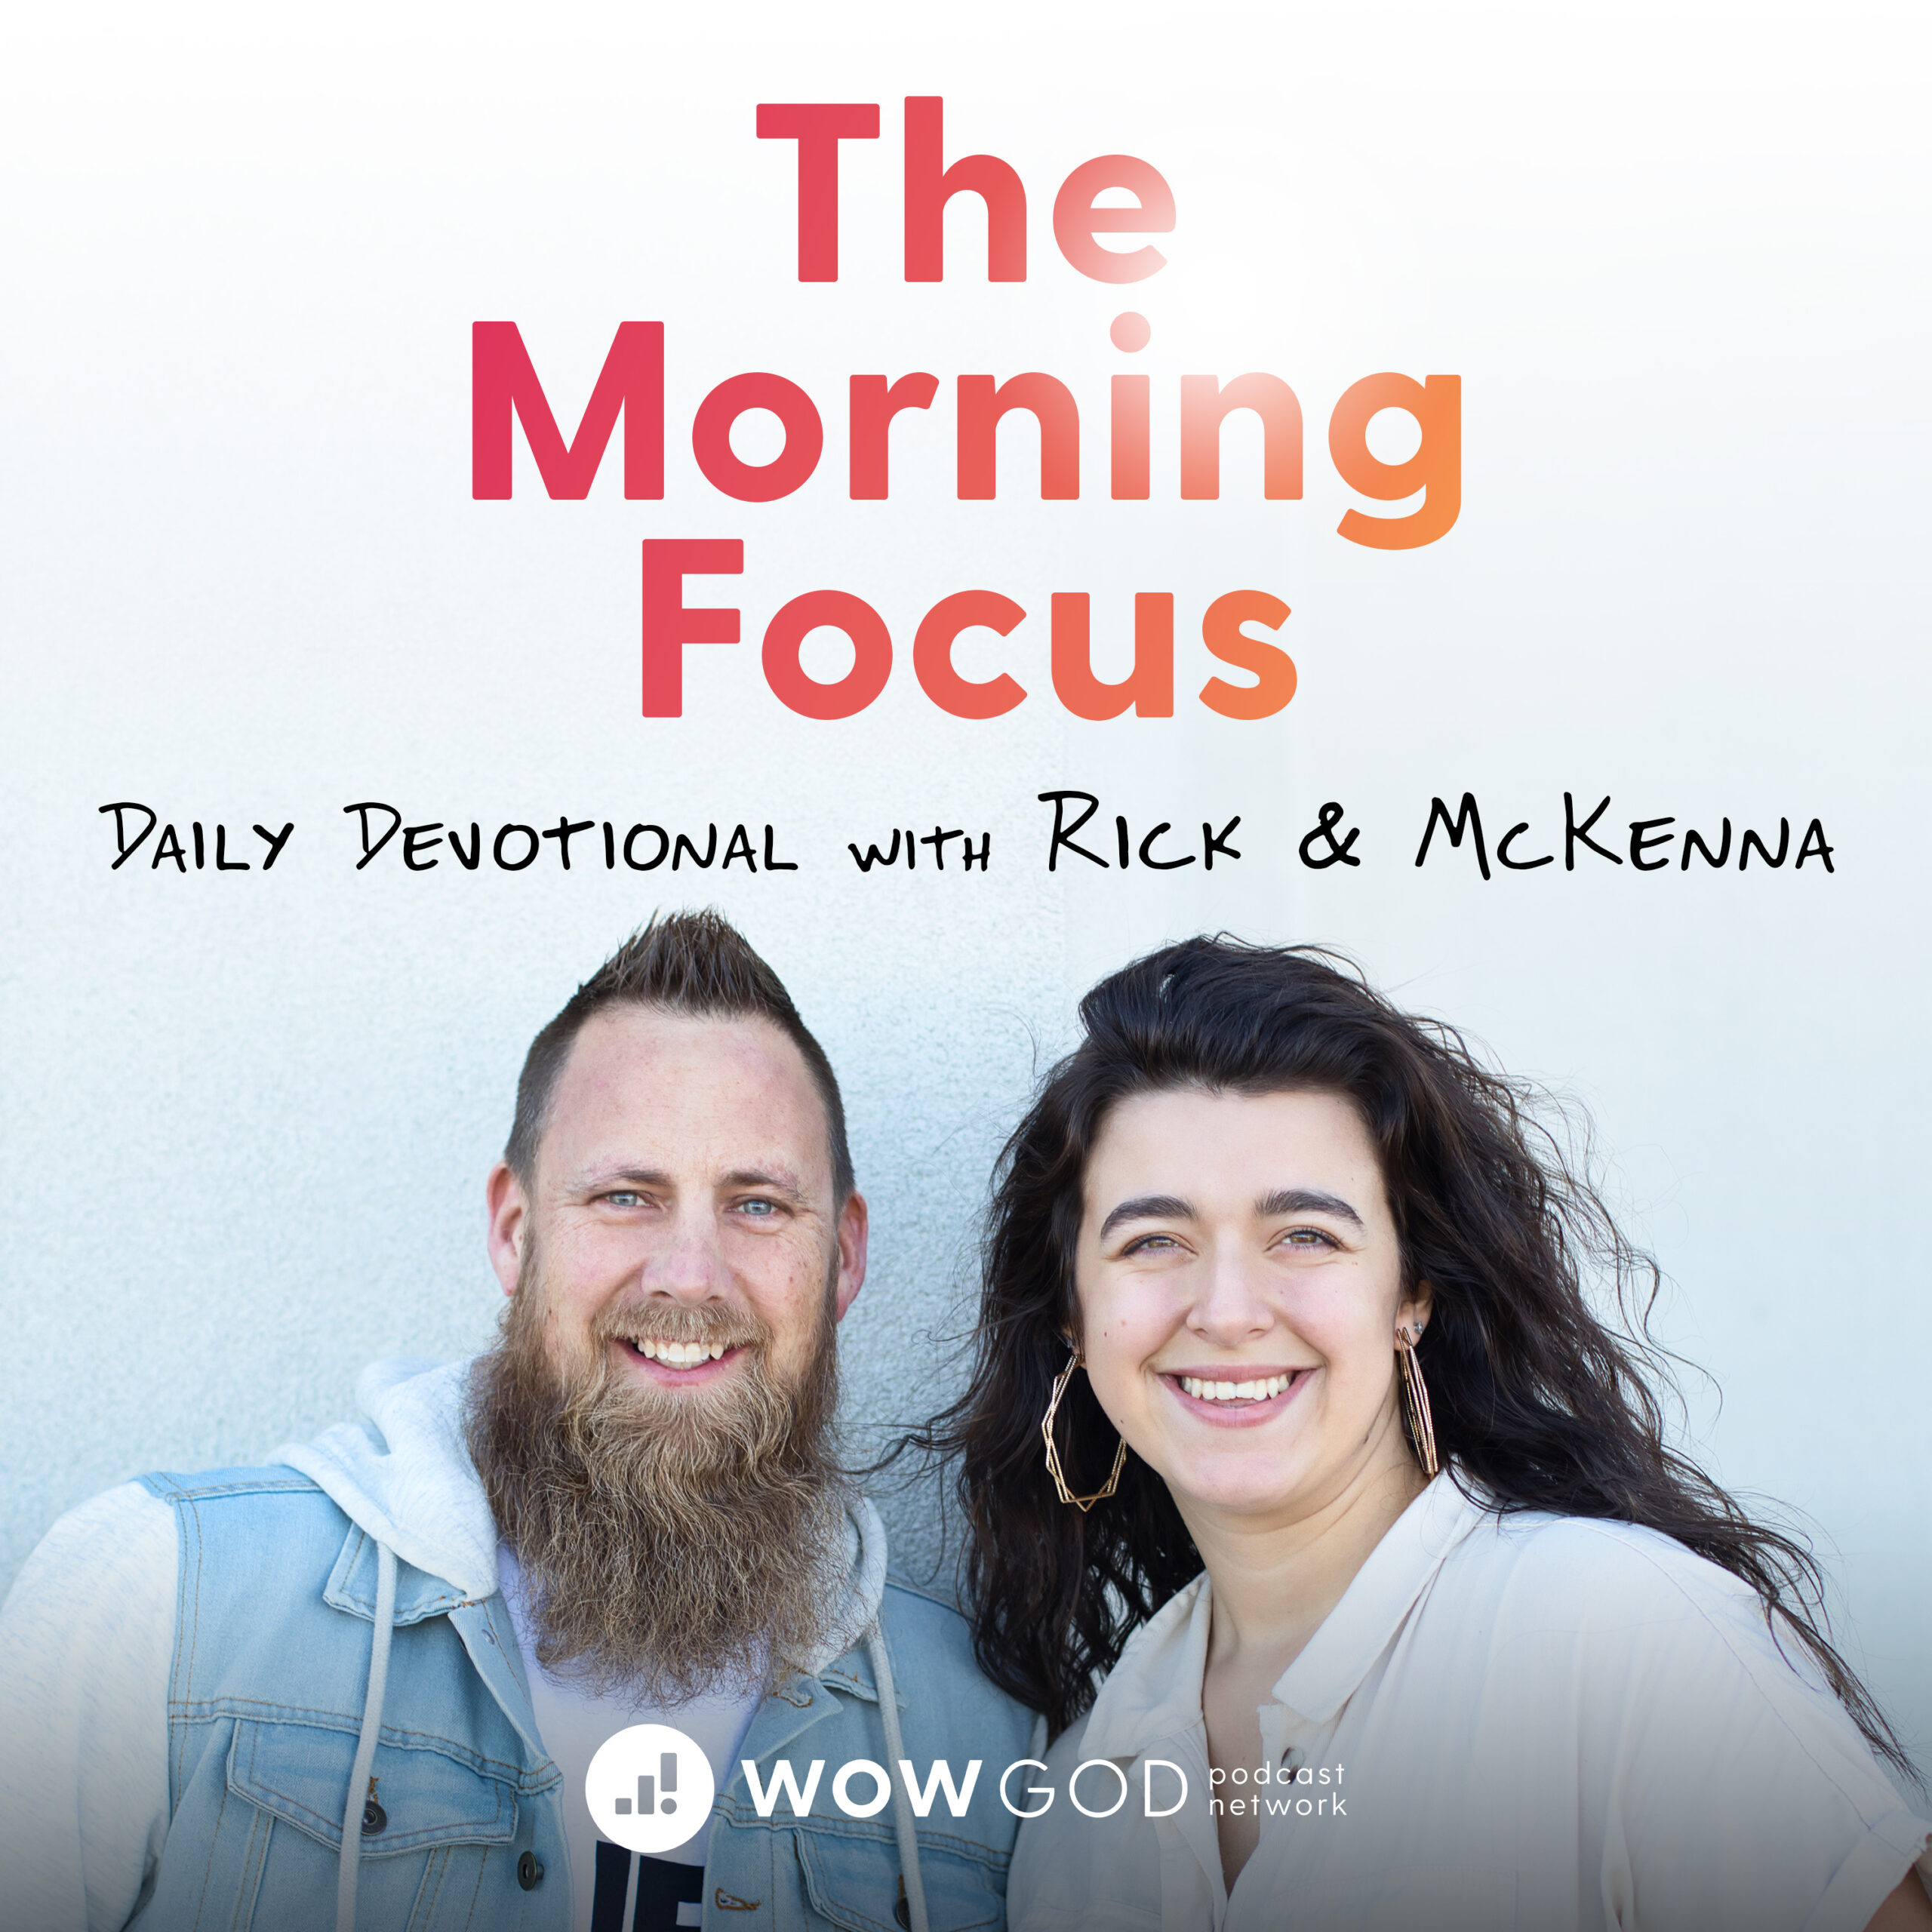 Rick and McKenna, hosts of the Morning Focus podcast